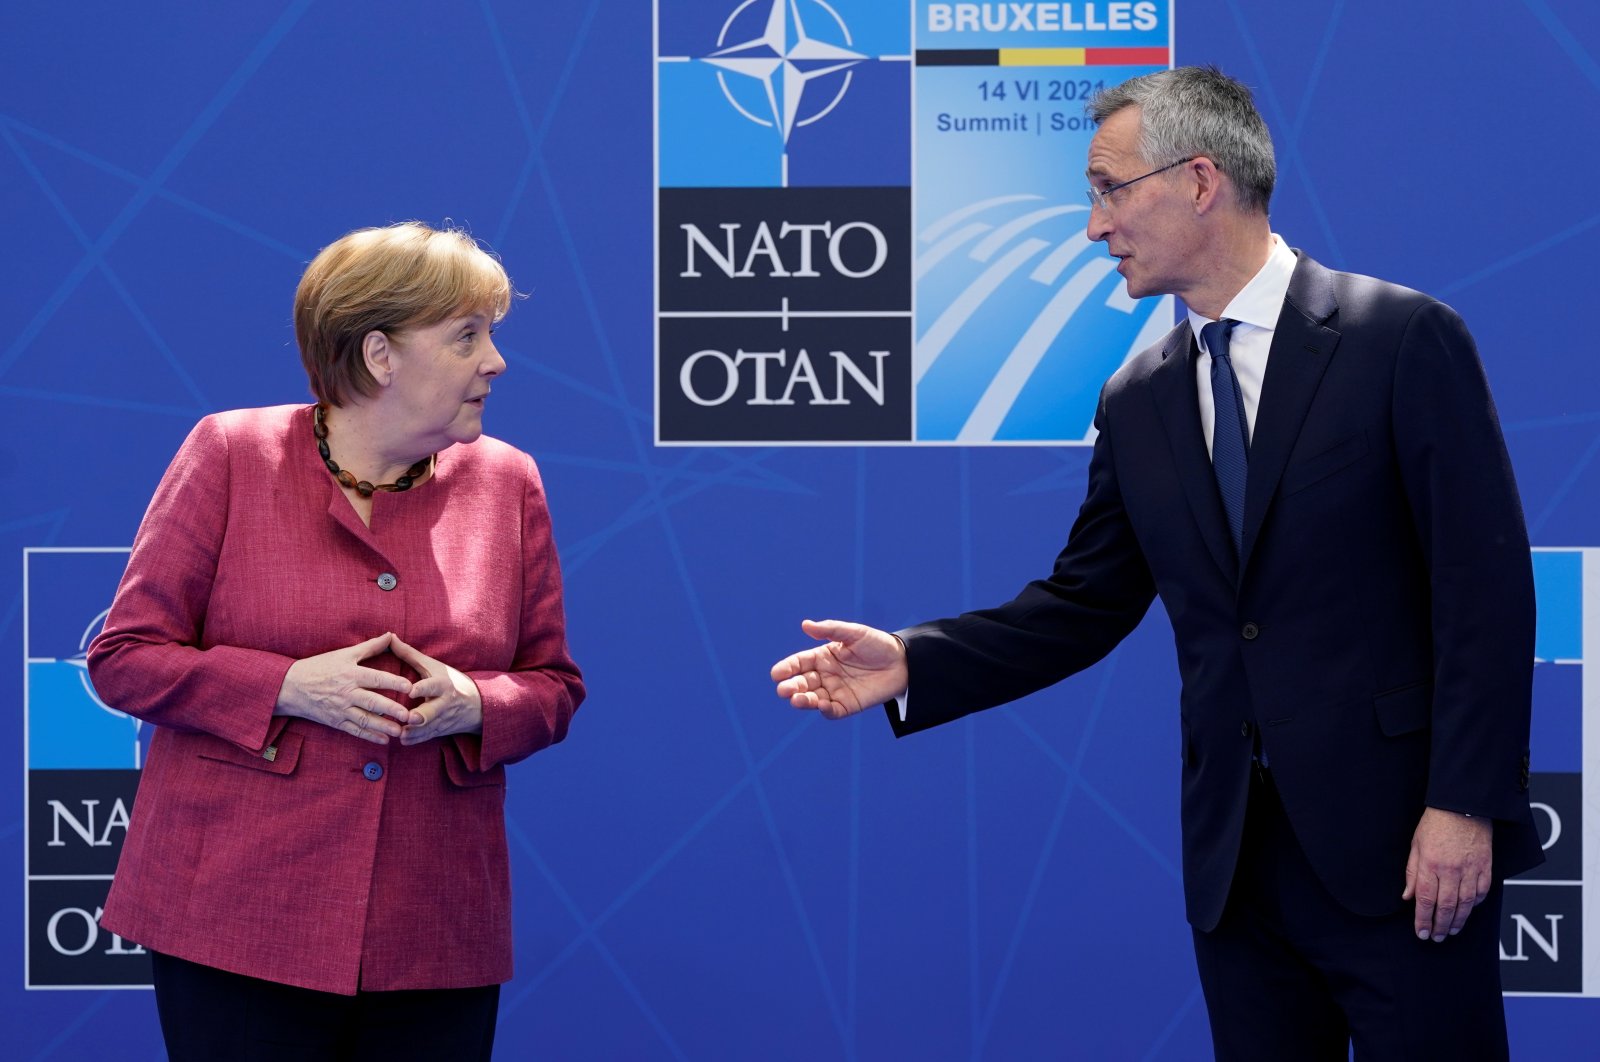 German Chancellor Angela Merkel (L) speaks with NATO Secretary-General Jens Stoltenberg as they pose for photos during the NATO summit at NATO headquarters in Brussels, Belgium, June 14, 2021. (Reuters Photo)